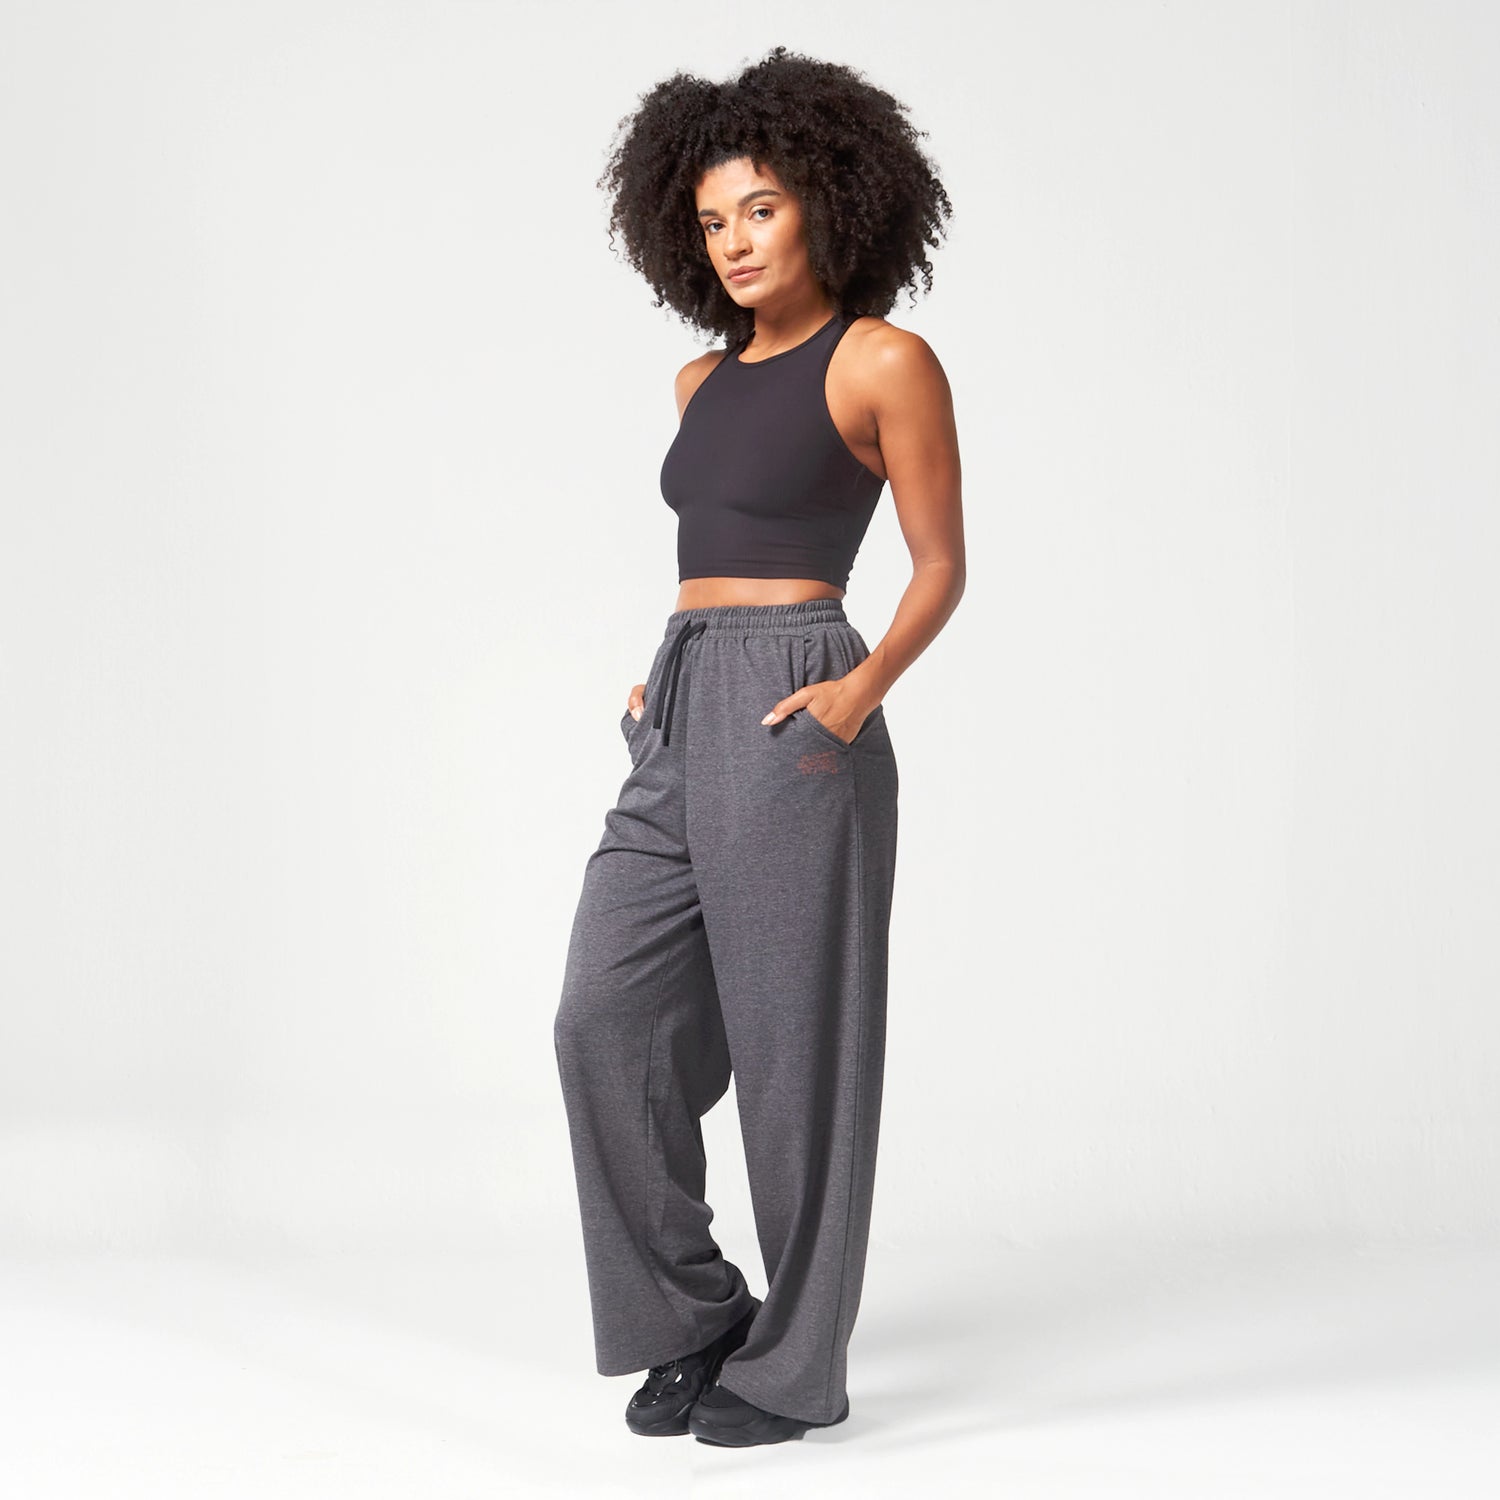 AE | Code Live in Joggers - Black Marl | Workout Pants Women | SQUATWOLF